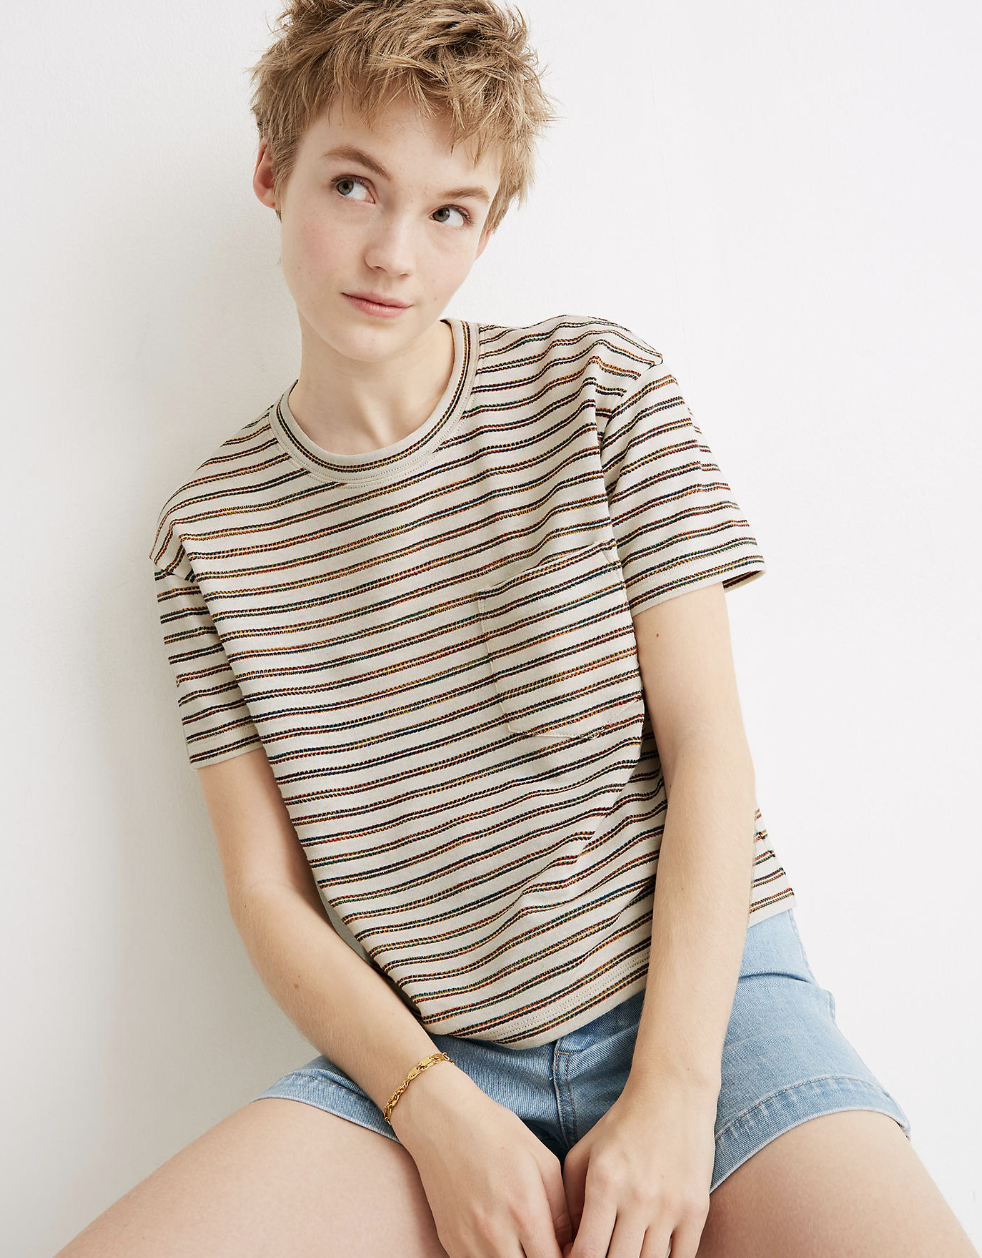 A model in a short-sleeved striped beige tee with a pocket at the left side of the chest 